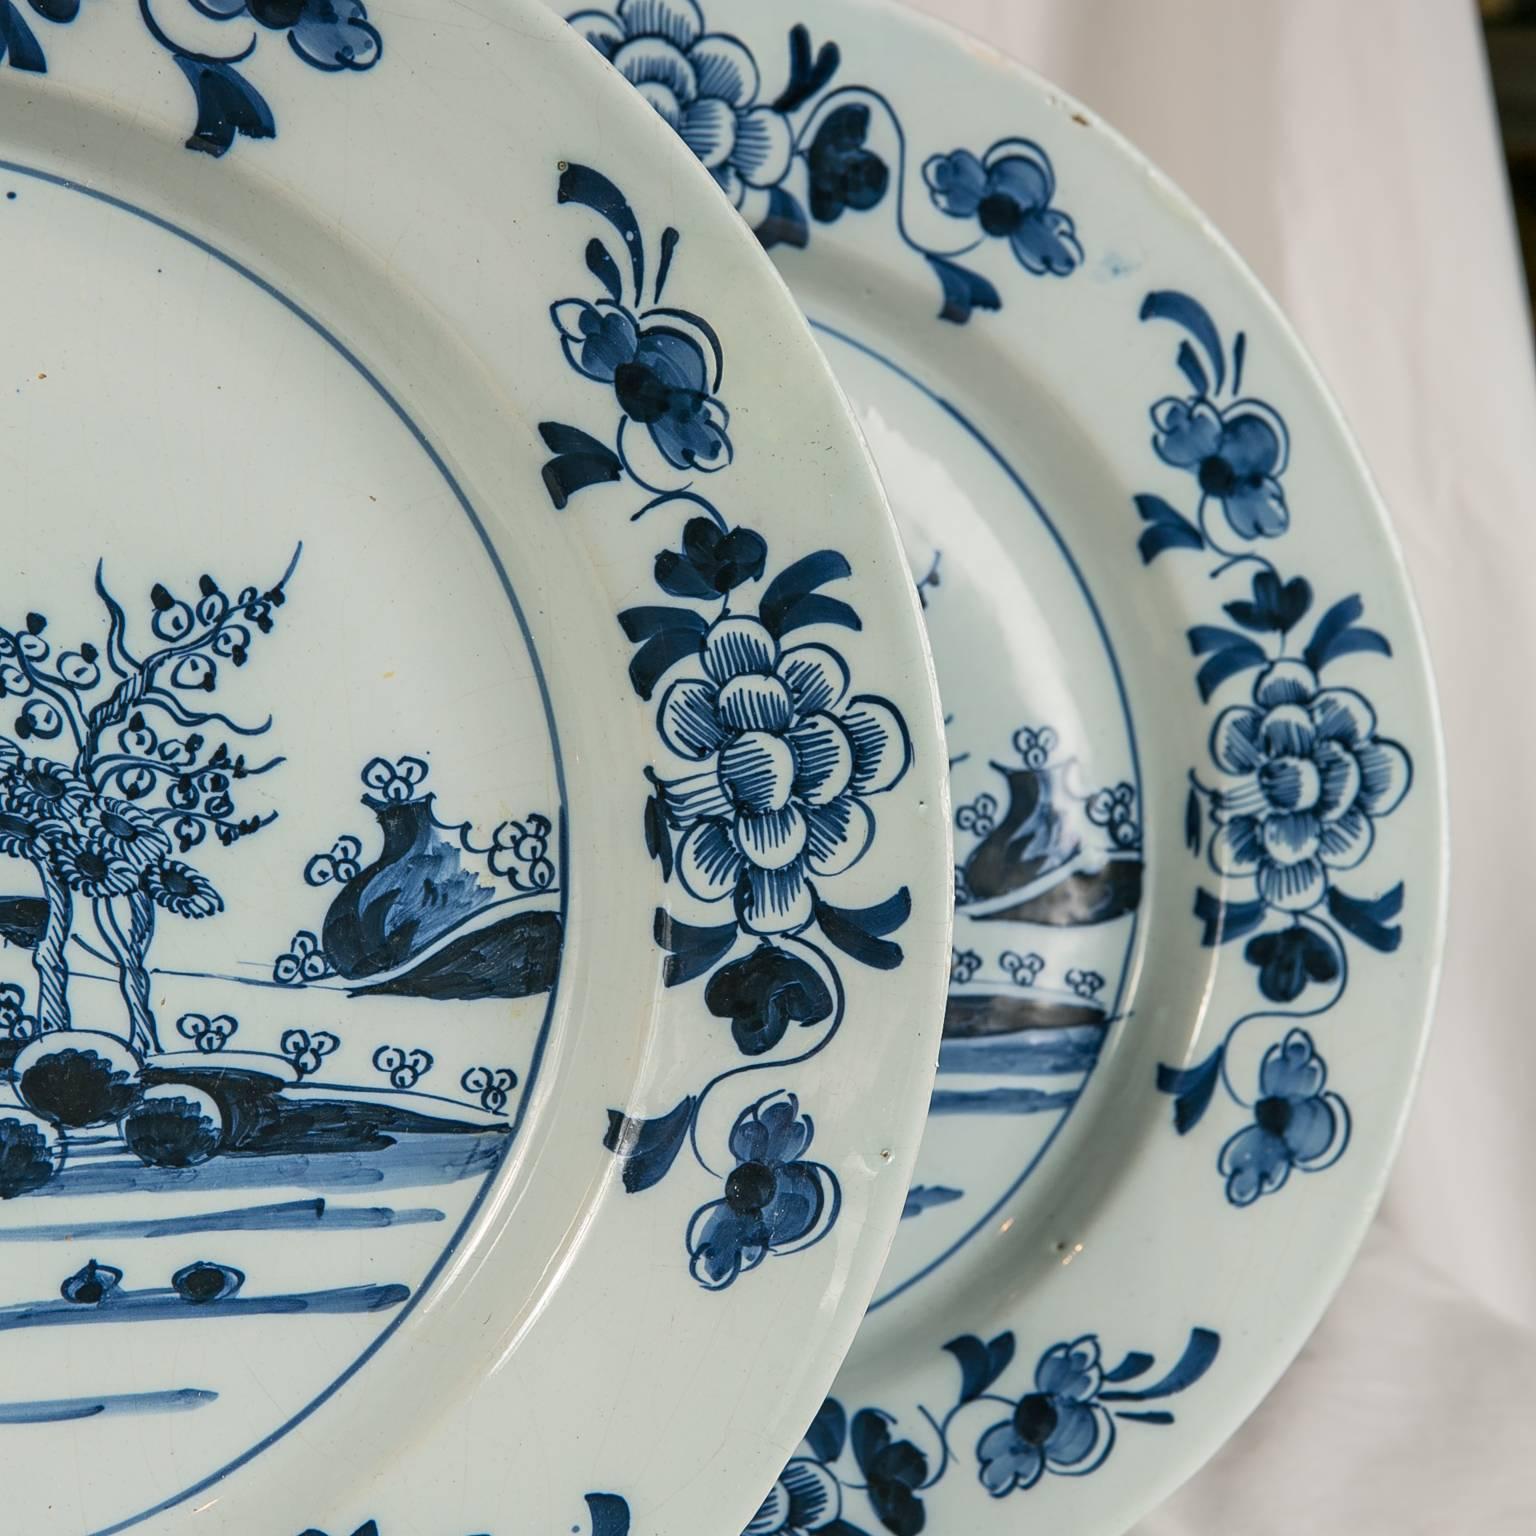 We are pleased to offer this pair of Bristol Delft Blue and White chargers showing a waterside scene with a flowering tree, rocky outcroppings, and birds in flight. The border decorated with flowers and scrolling vines. This pair of Delft chargers